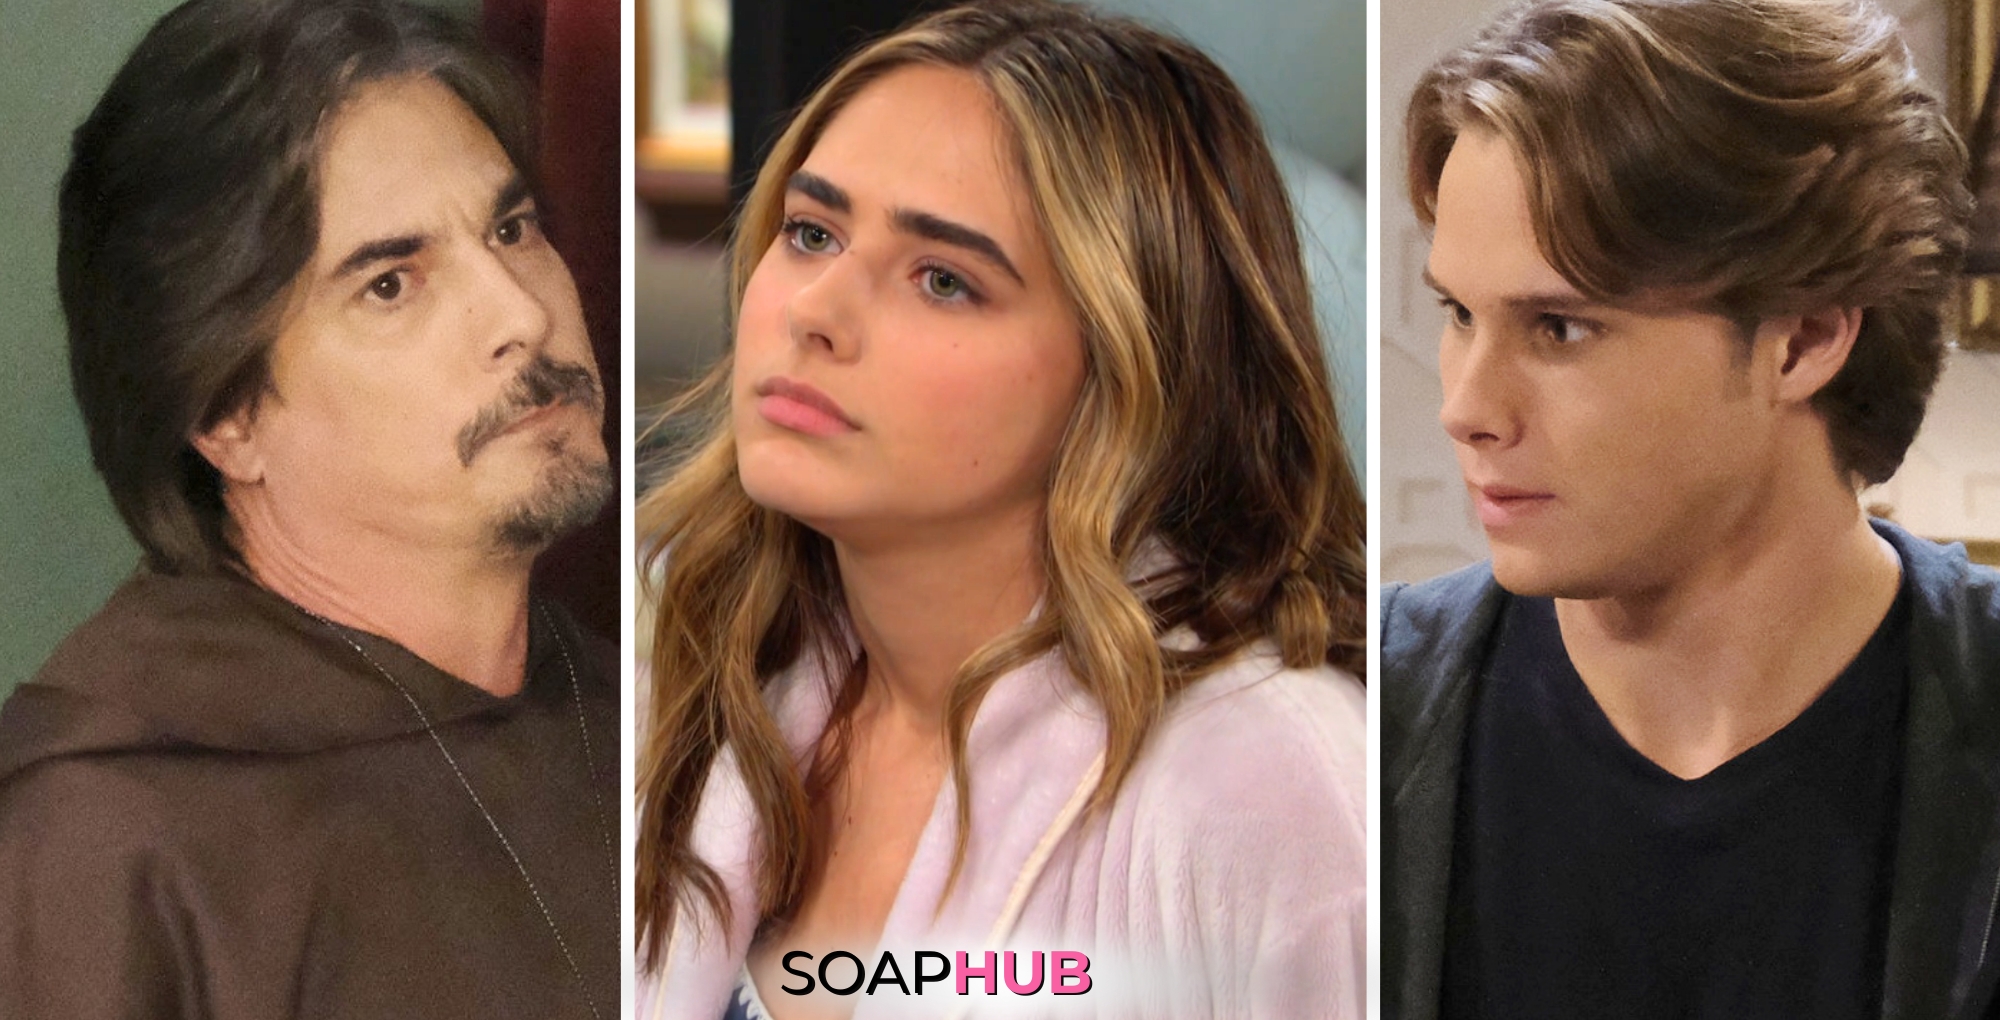 Days of our Lives spoilers for April 4 feature Rafe, Holly, and Tate with the Soap Hub logo across the bottom.